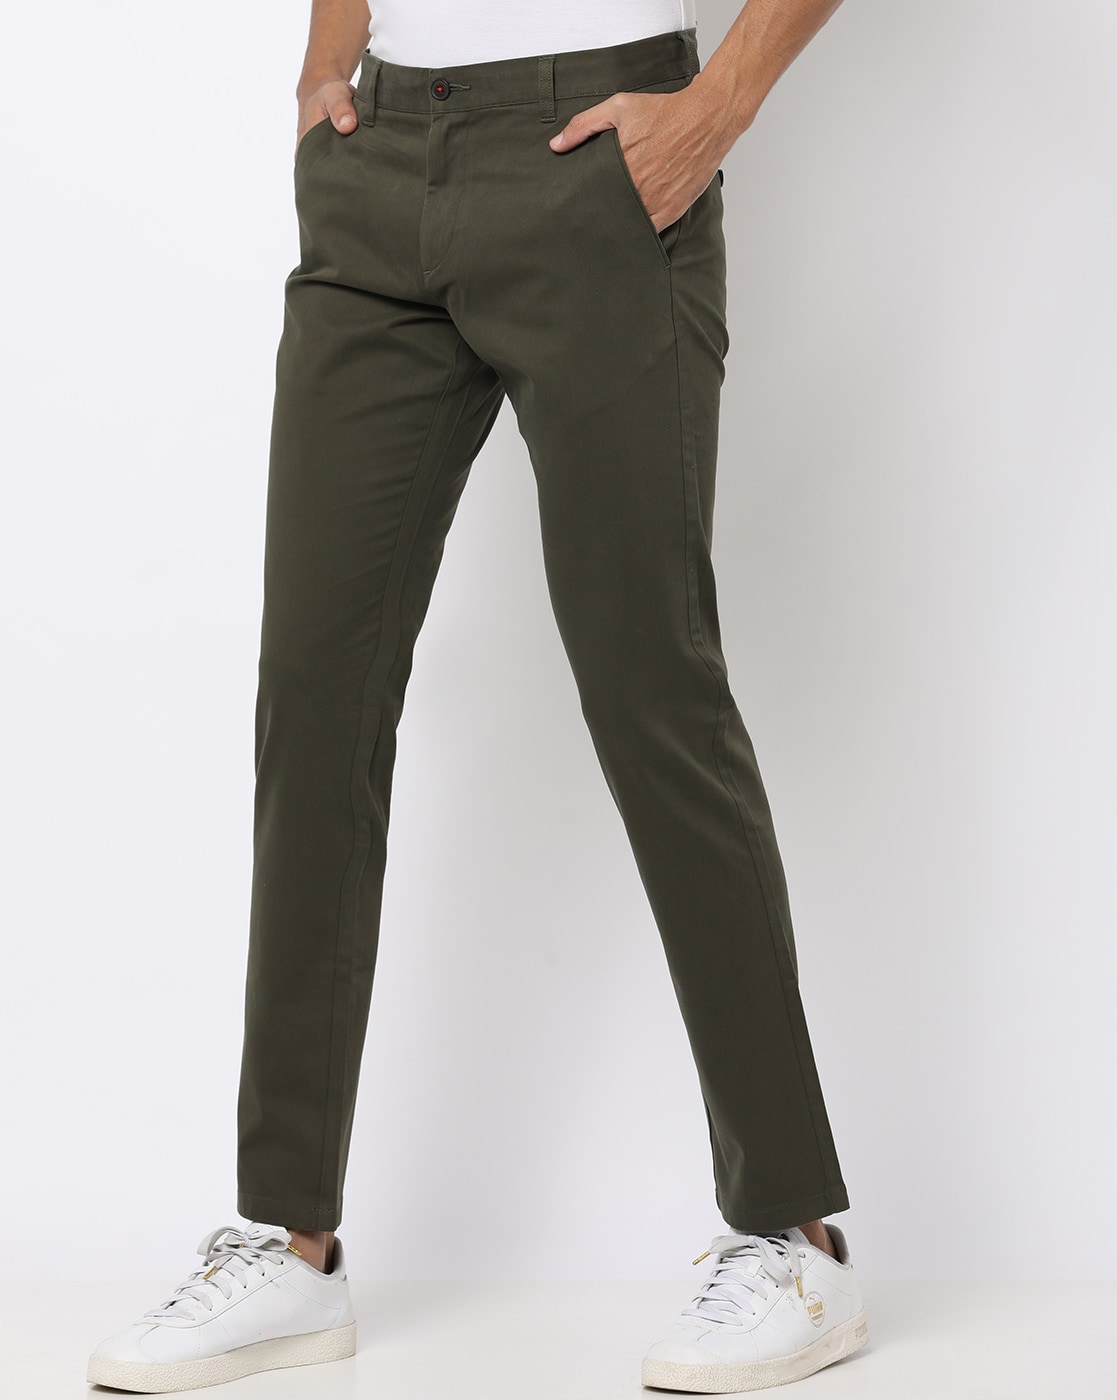 Buy Olive Green Trousers & Pants for Men by VHSPORT Online | Ajio.com